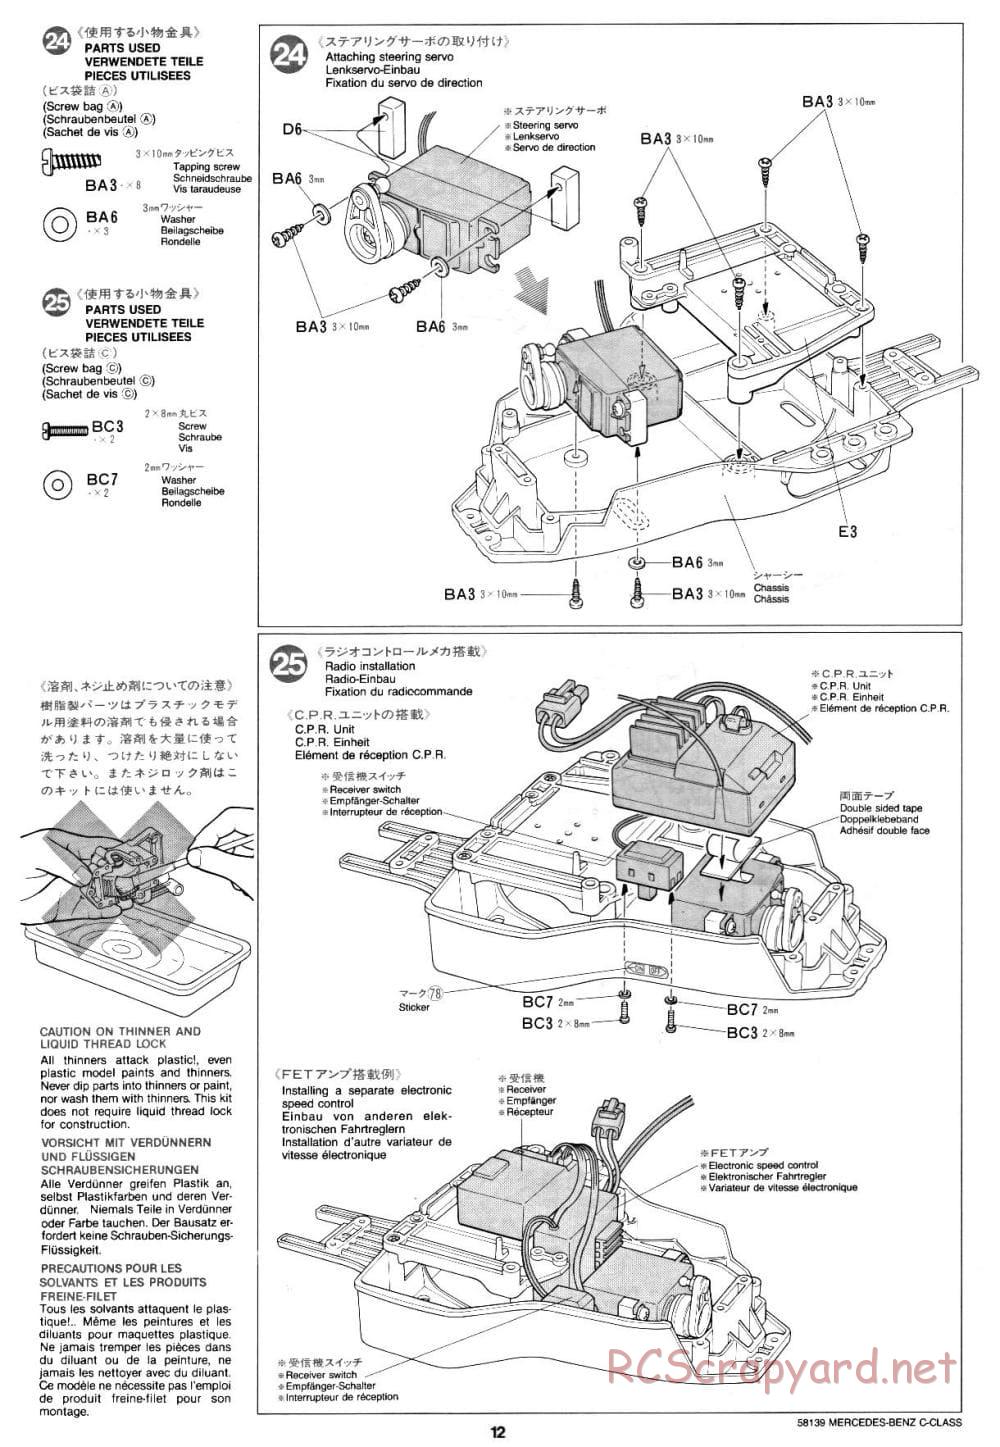 Tamiya - AMG Mercedes-Benz C-Class DTM D2 - TA-02 Chassis - Manual - Page 12